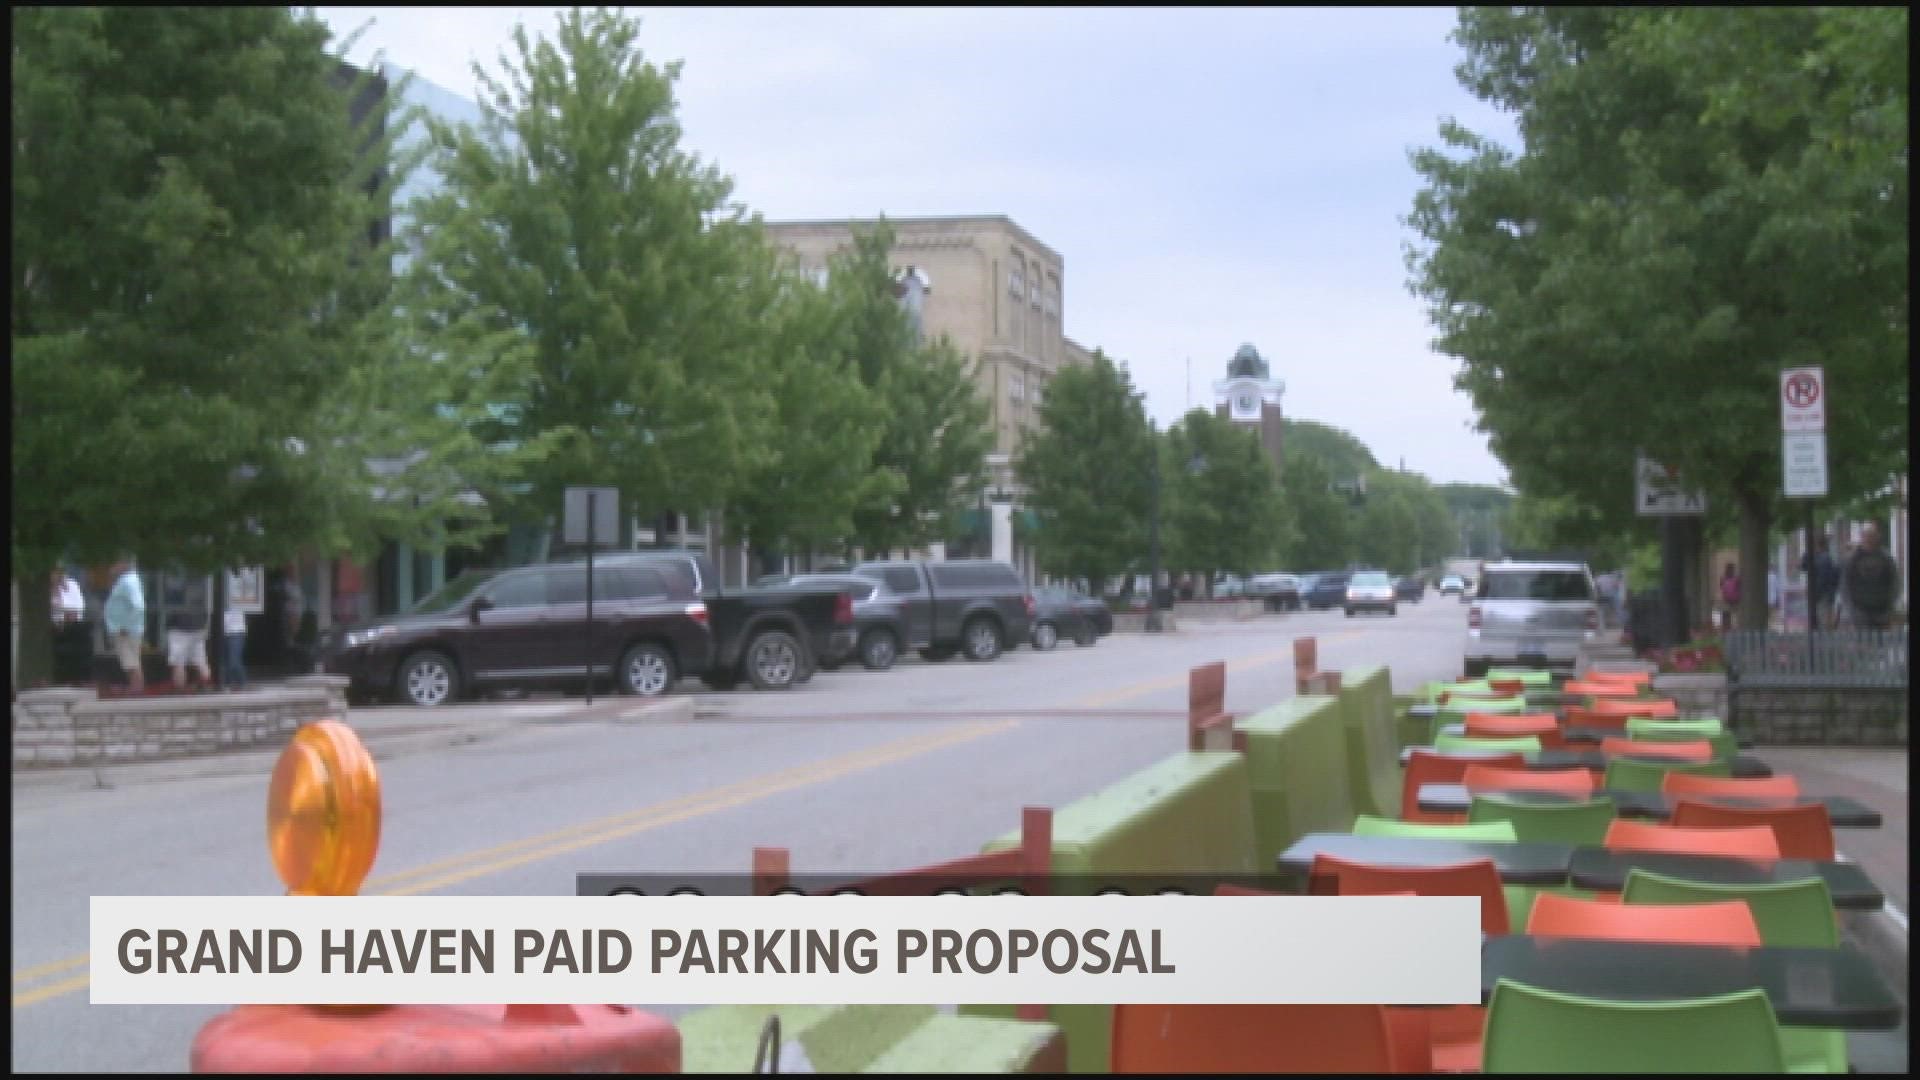 The city's Mayor Pro Tem said the city's budget deficit is what has them considering the option to create paid parking for both the downtown and beach areas.